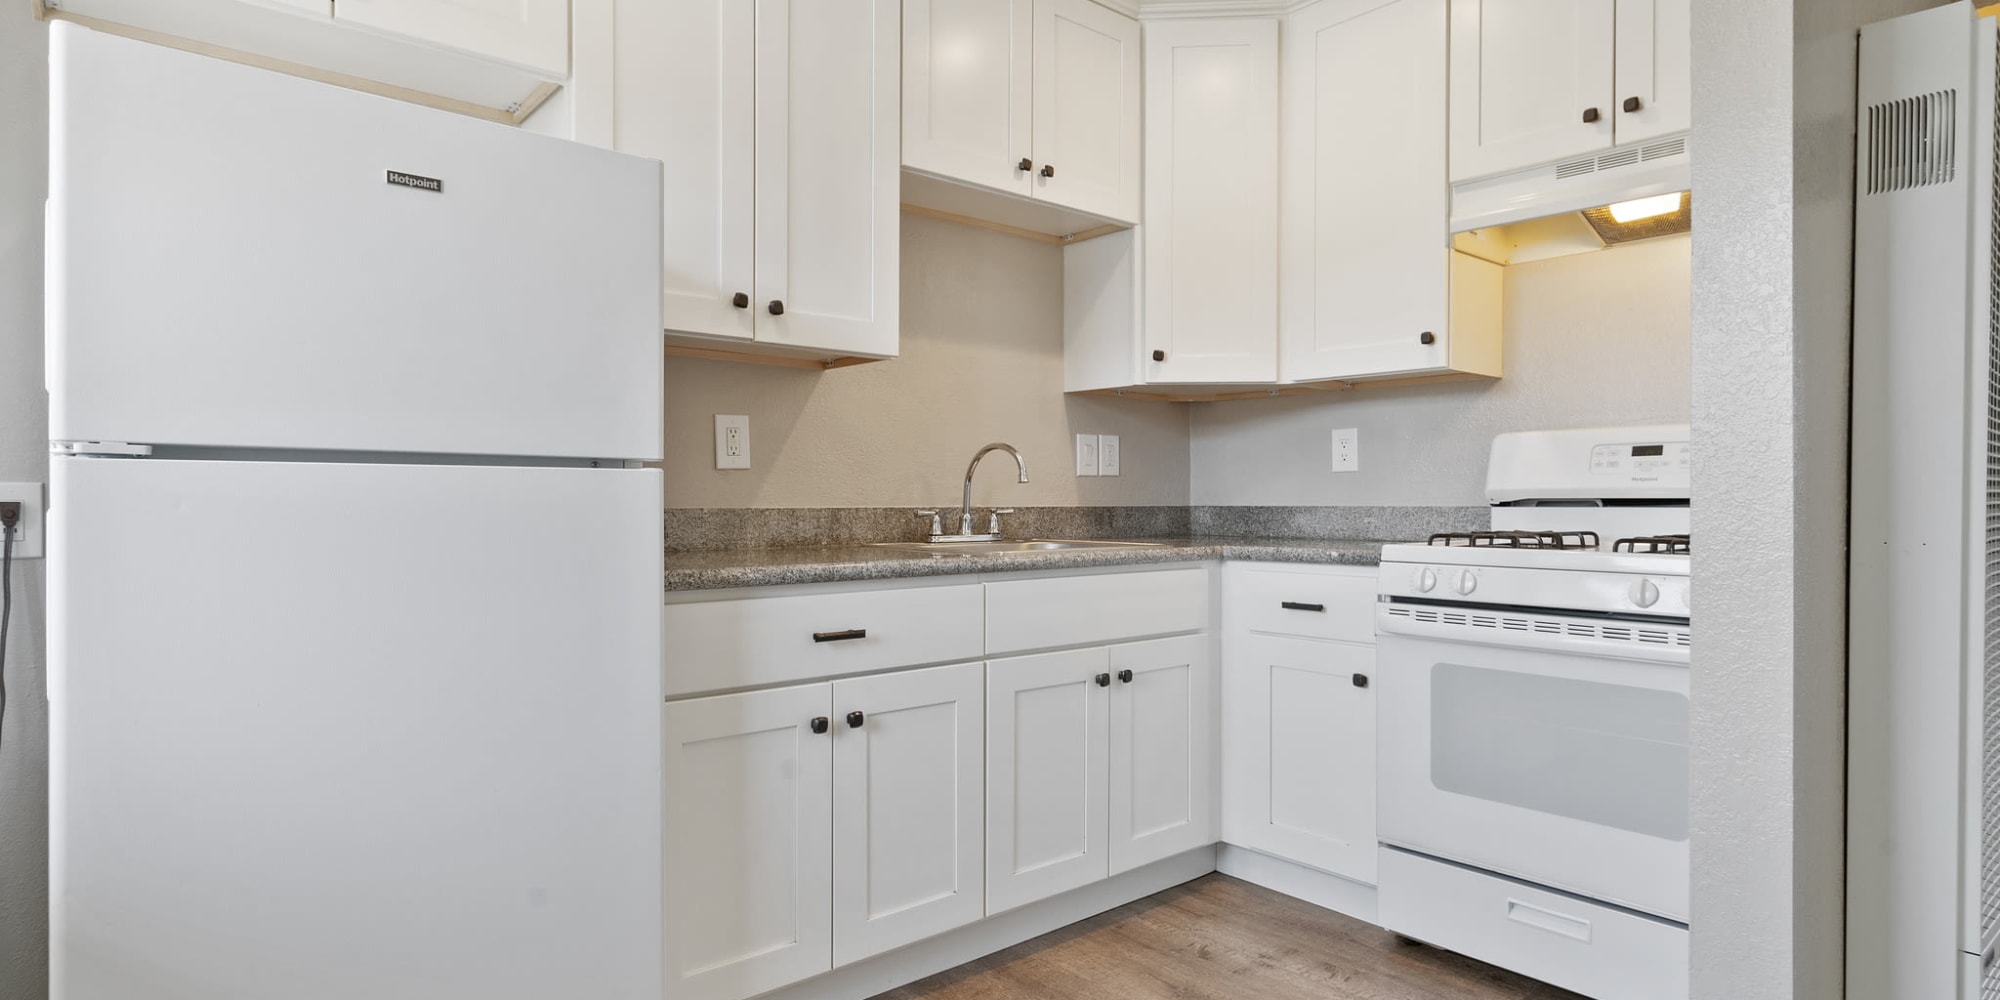 Kitchen at Royal Gardens Apartment Homes in Livermore, California